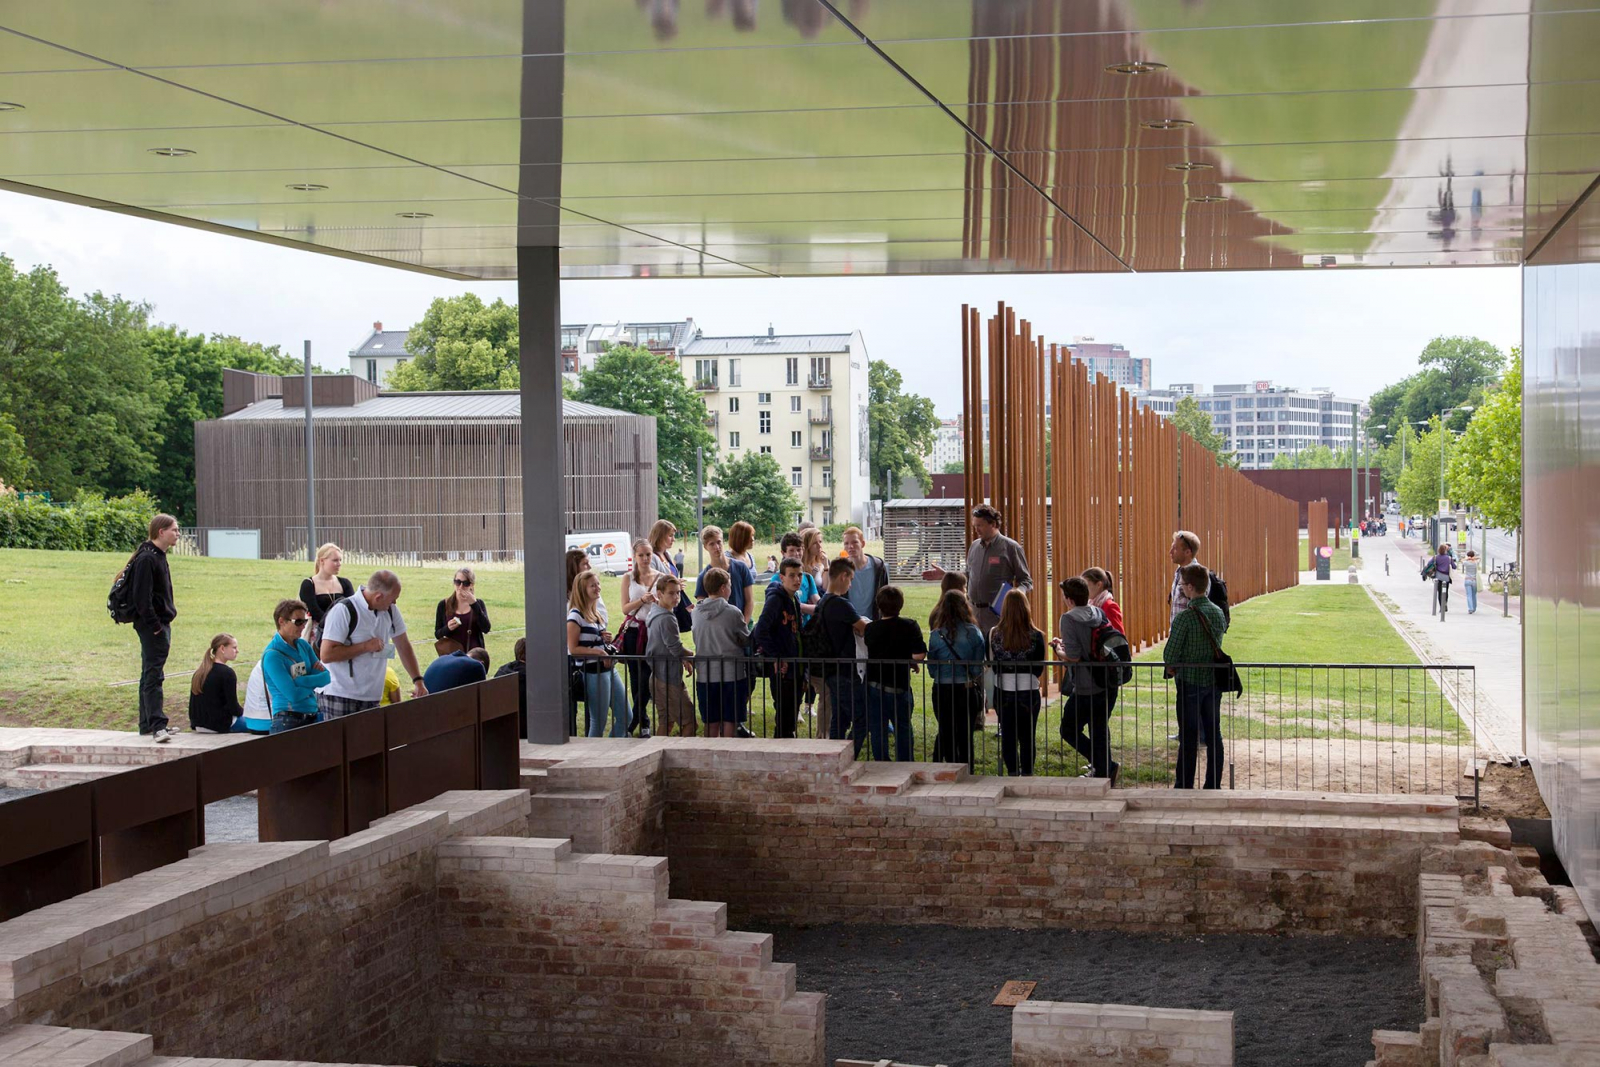 A group of schoolchildren in front of the ruins at the Grenzhaus, the Berlin Wall Memorial